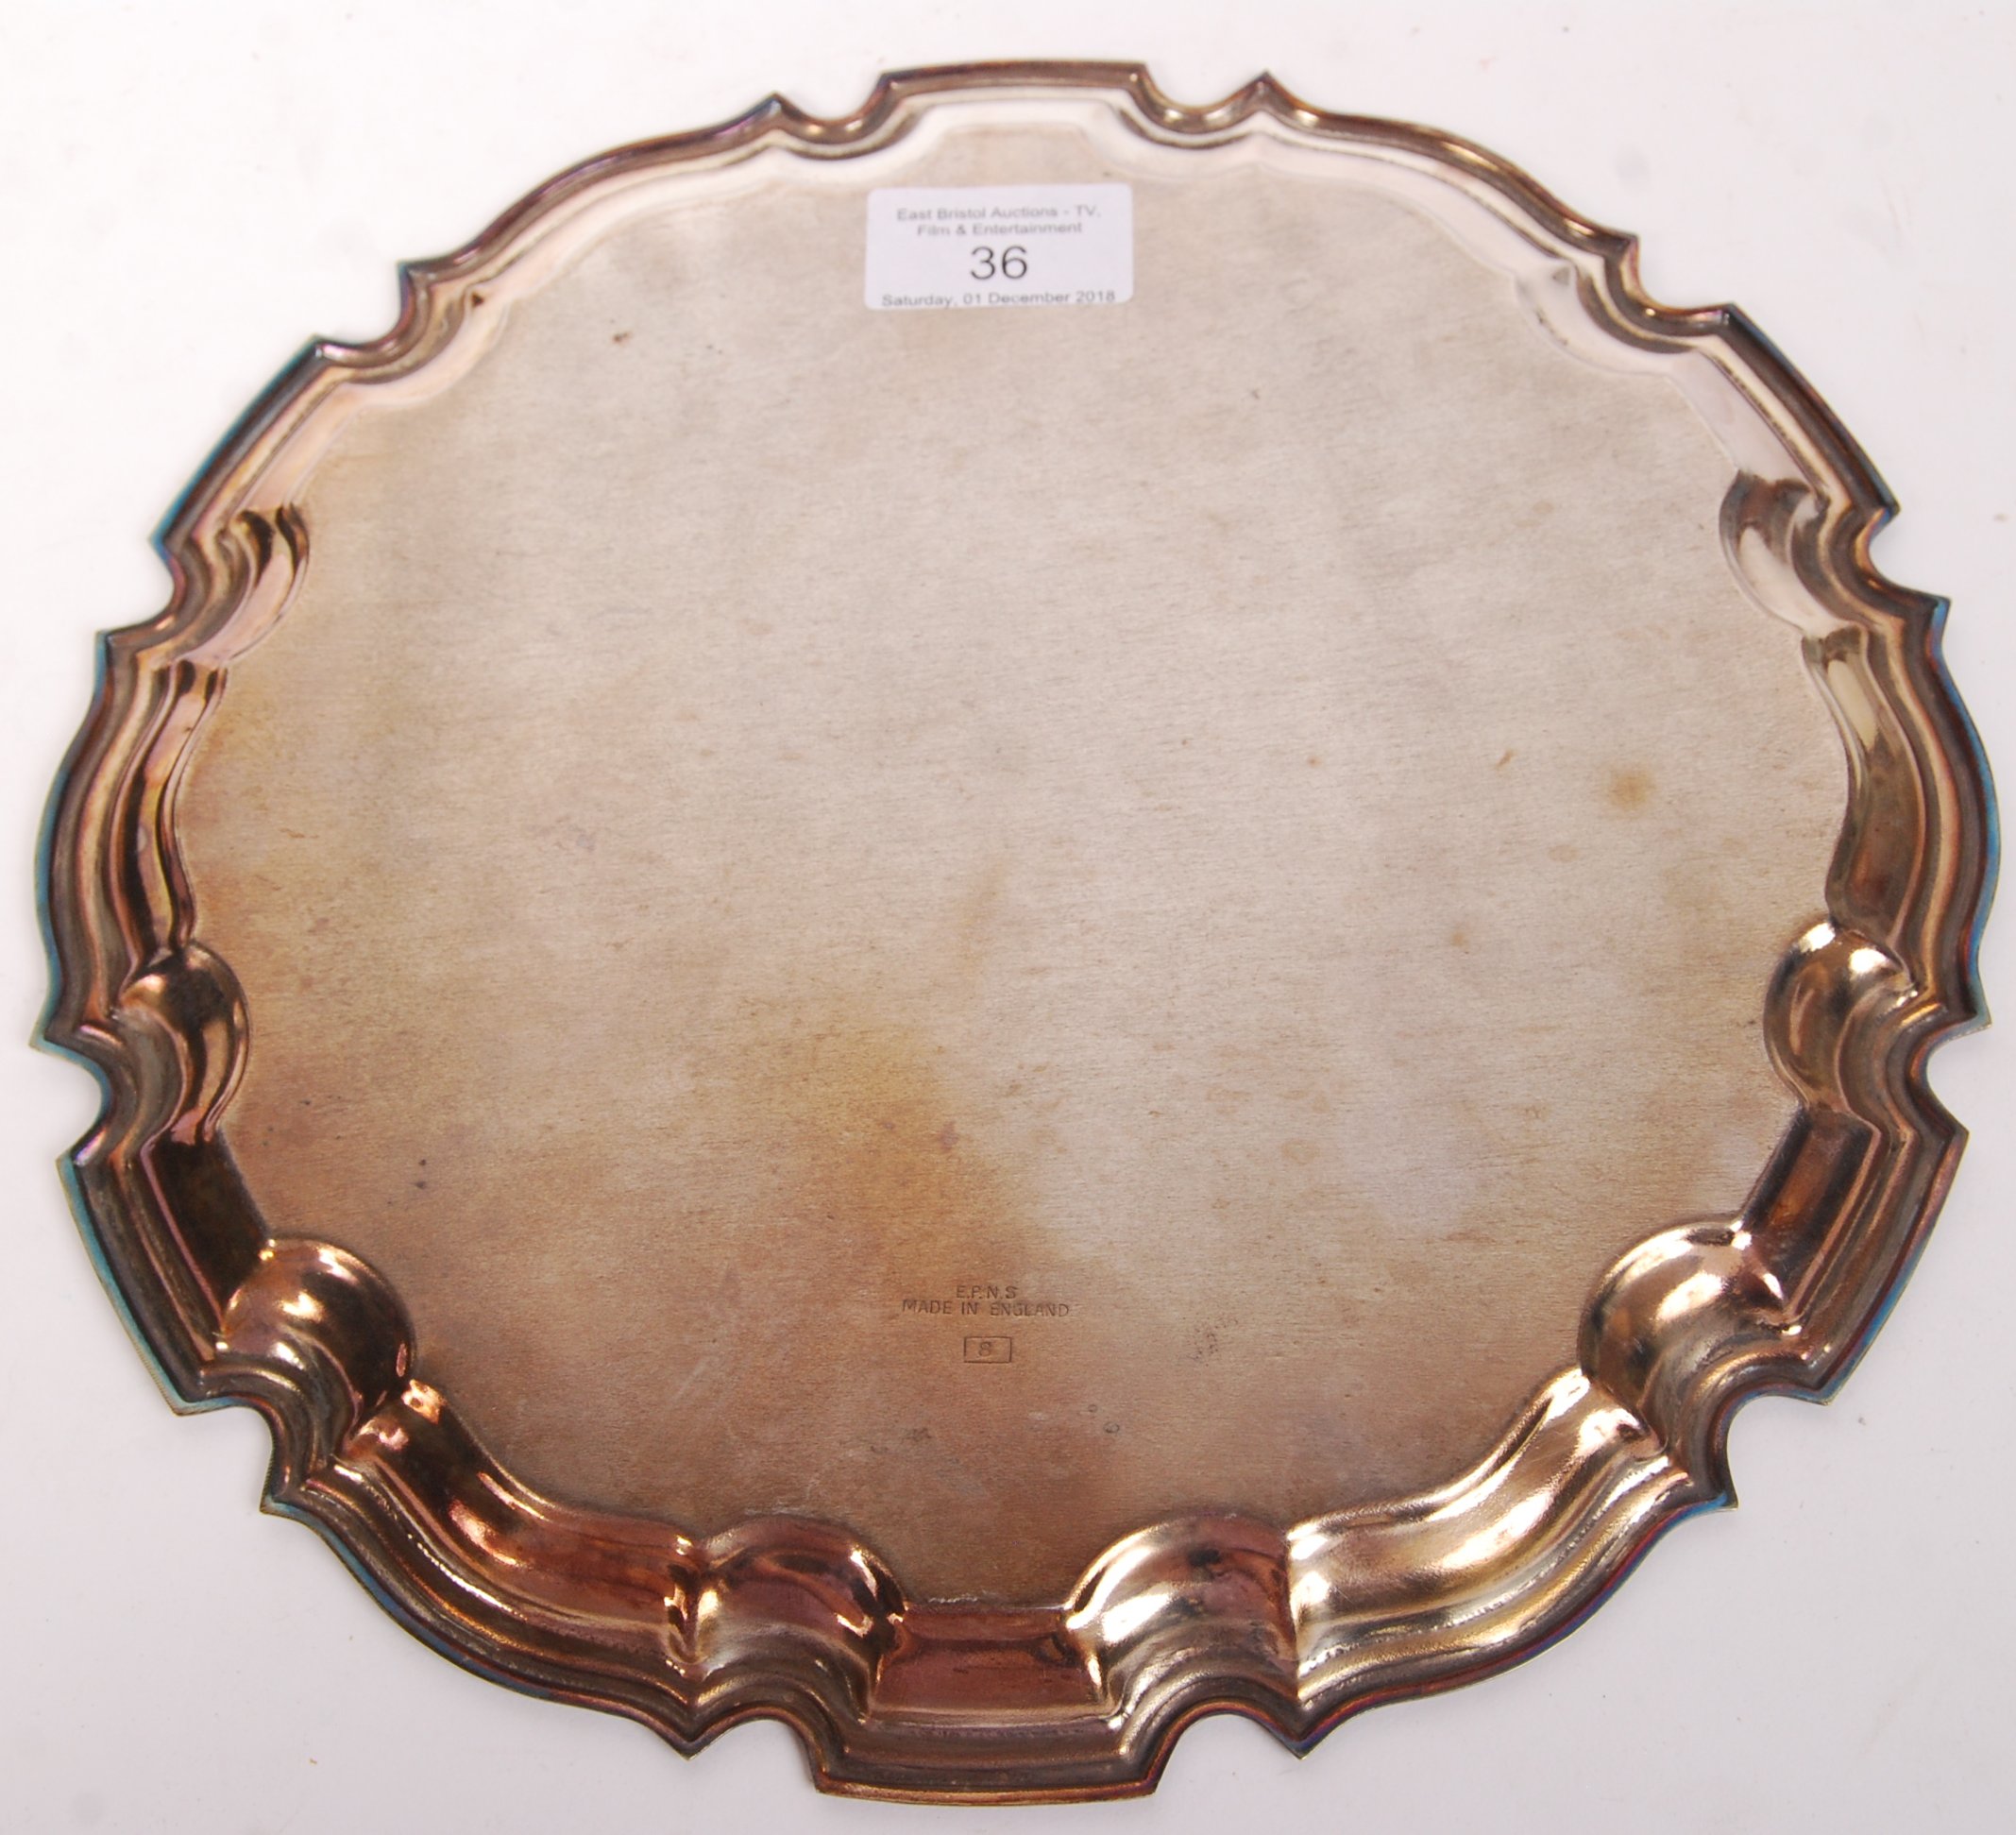 ORIGINAL HTV ' MR & MRS ' SHOW-GIVEN SILVER PLATE TRAY - Image 3 of 3